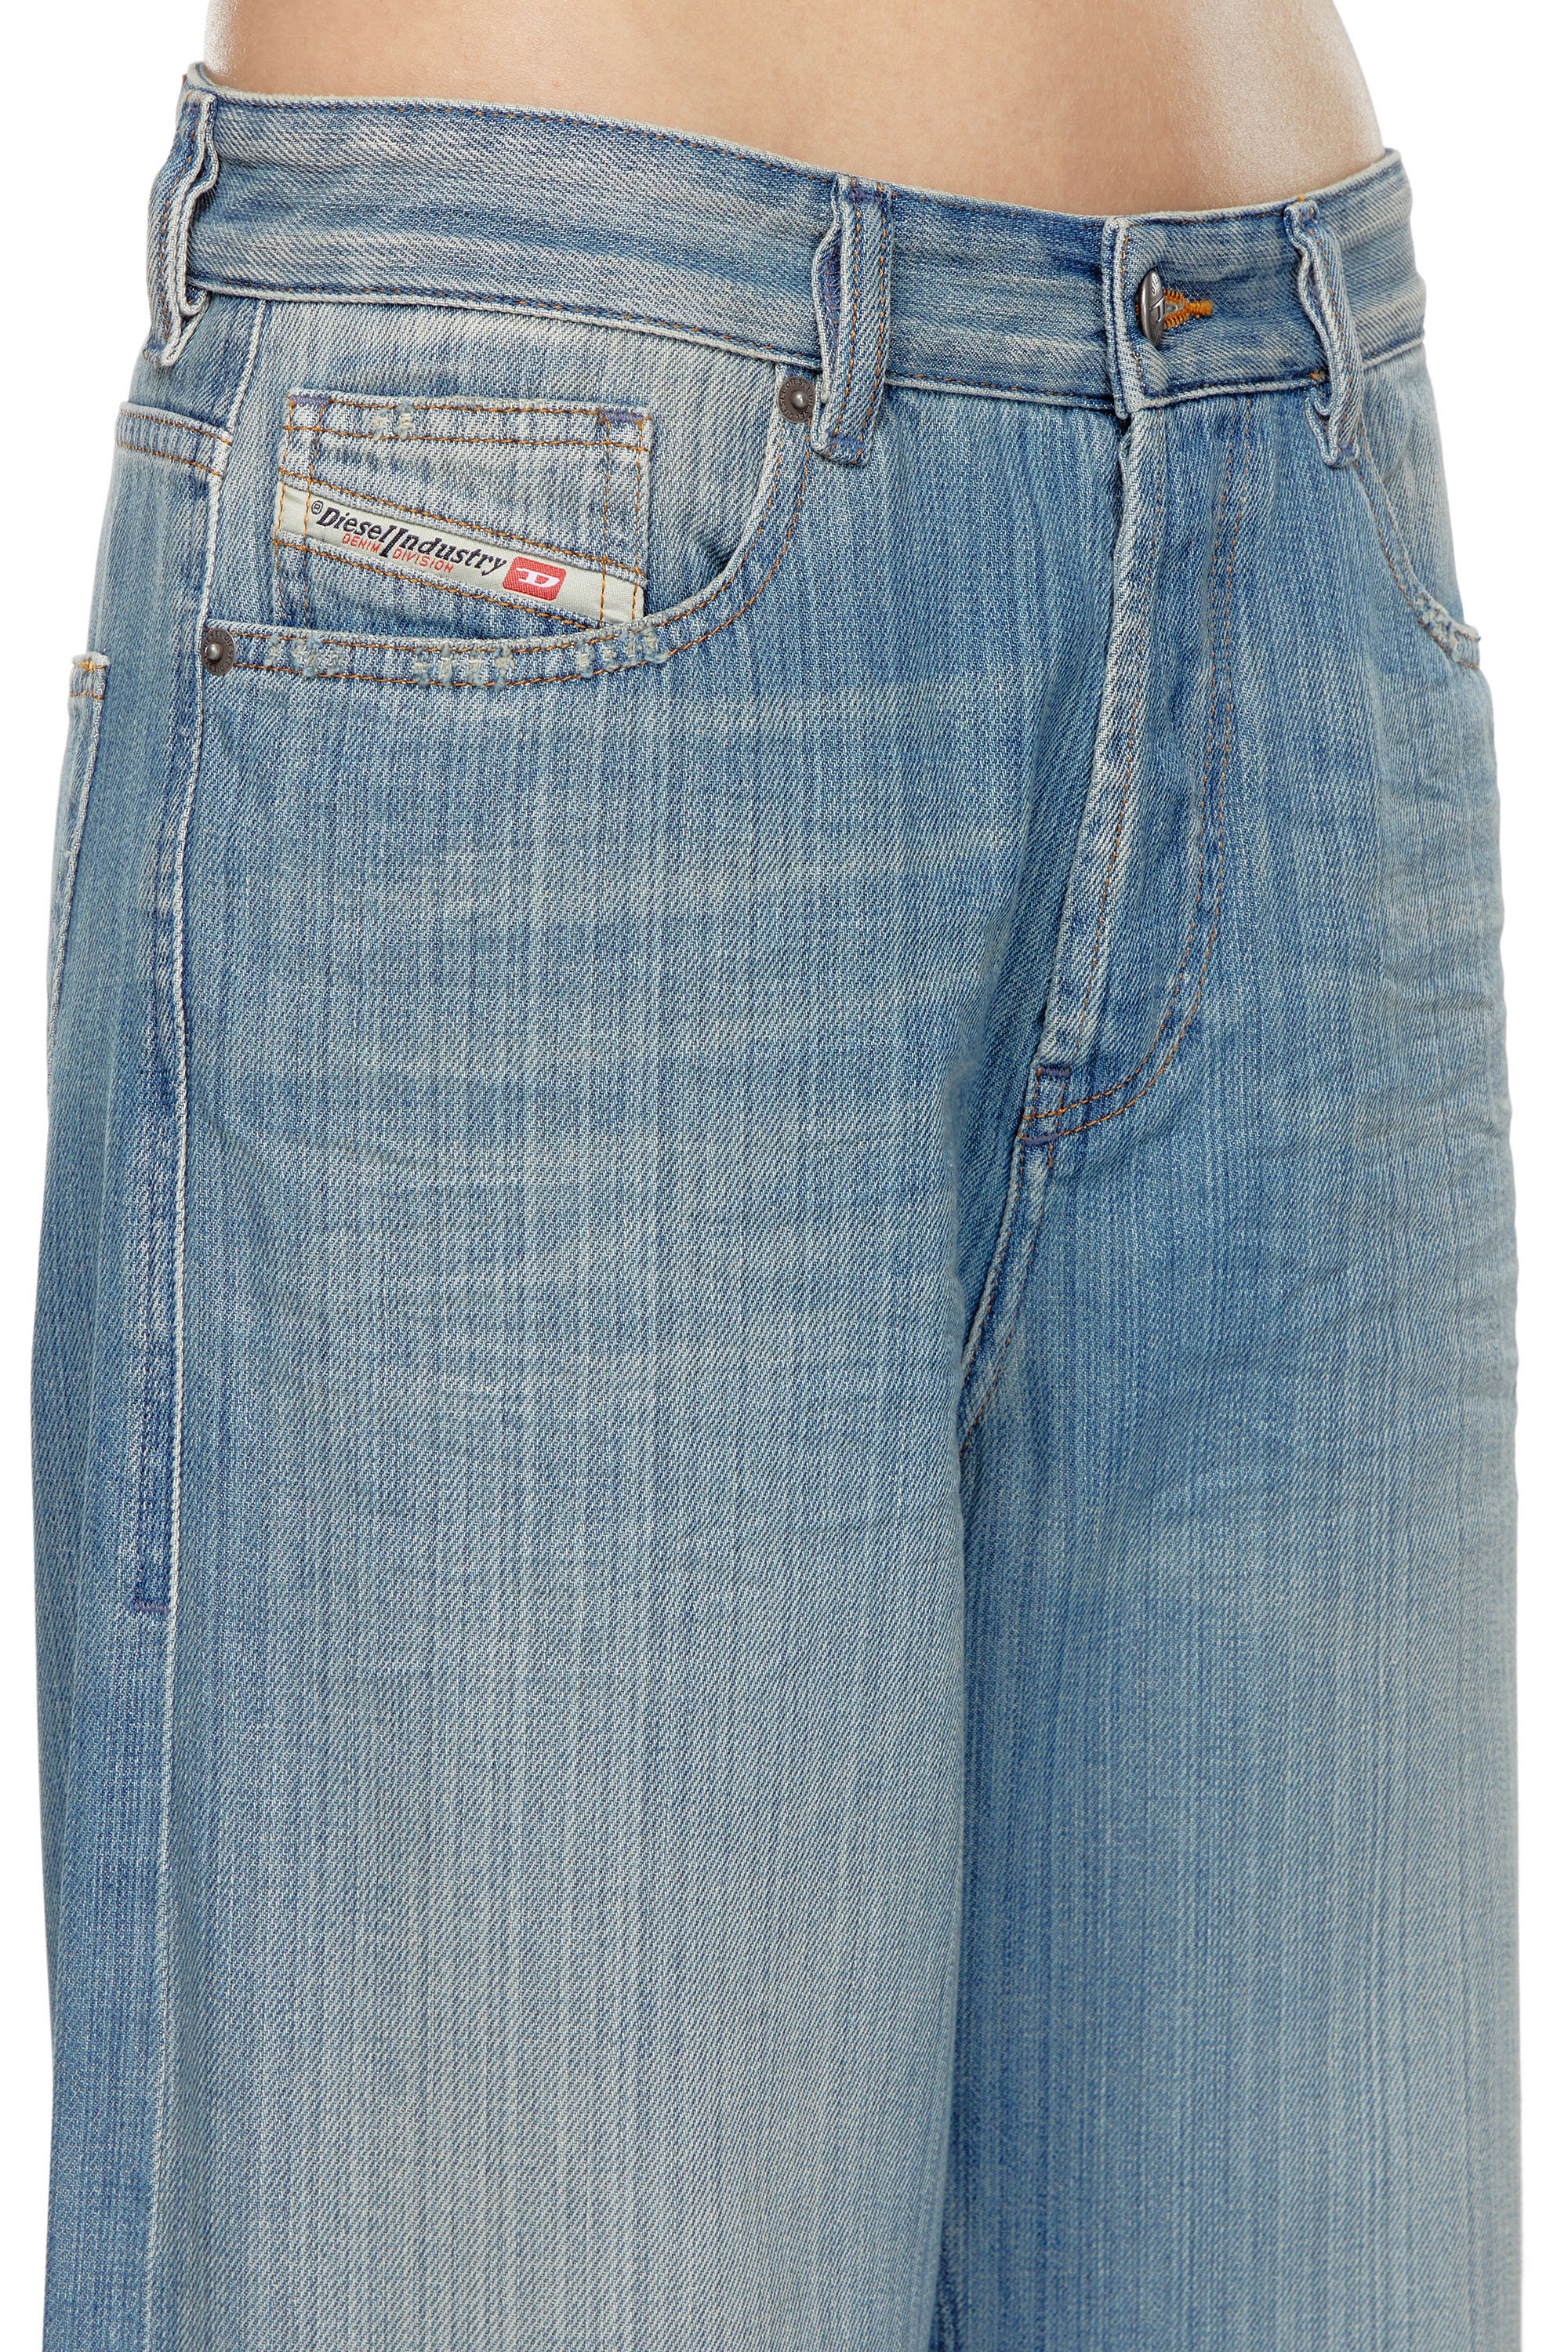 Diesel - Straight Jeans 1996 D-Sire 09J87, Mujer Straight Jeans - 1996 D-Sire in Azul marino - Image 4